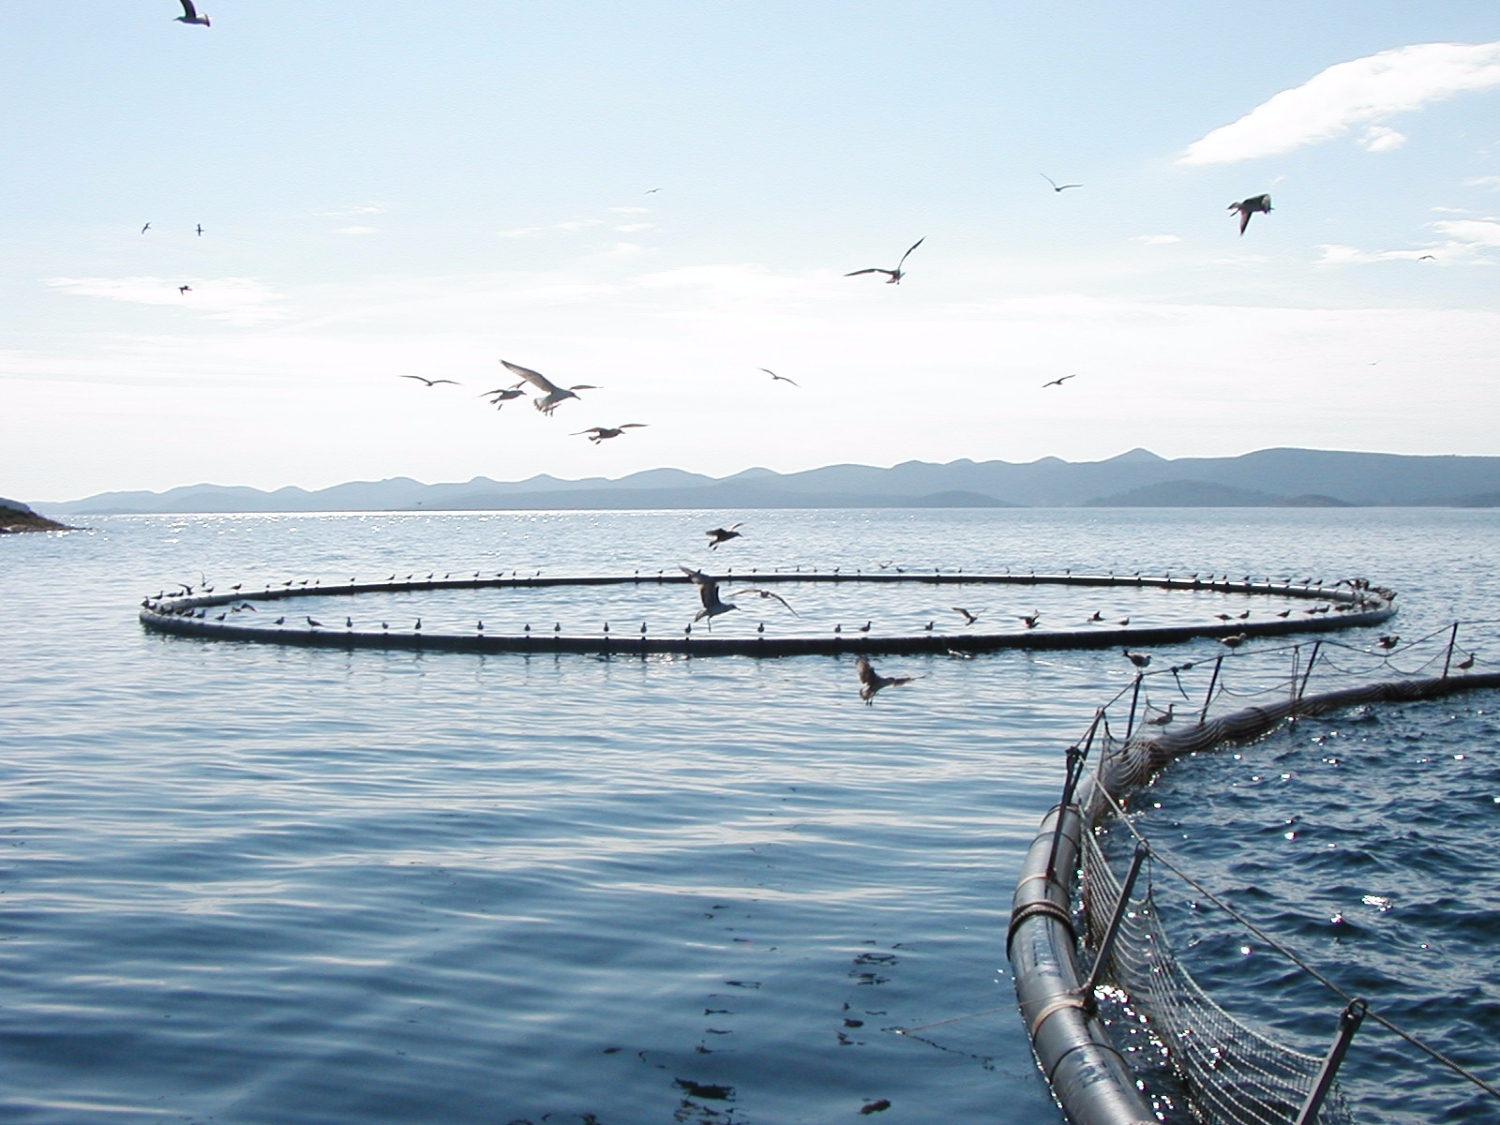 MASTER OF APPLIED SCIENCE IN AQUACULTURE CURRICULUM